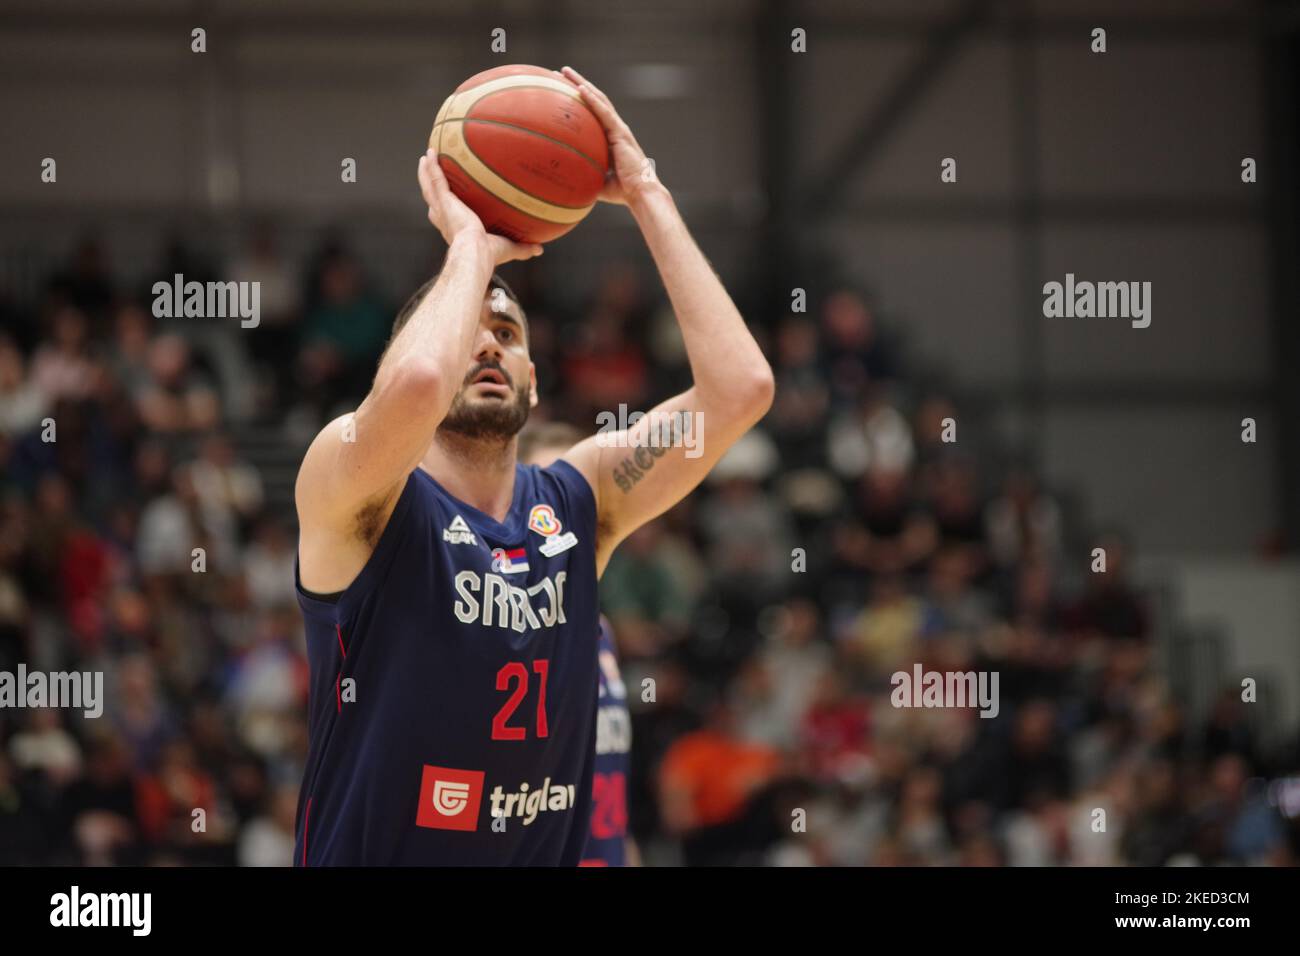 Newcastle upon Tyne, England, 11 November 2022. Marko Jagodic-Kuridza playing for Serbia against Great Britain in the FIBA Basketball World Cup 2023 Qualifiers at the Vertu Motors Arena. Credit: Colin Edwards/Alamy Live News Stock Photo